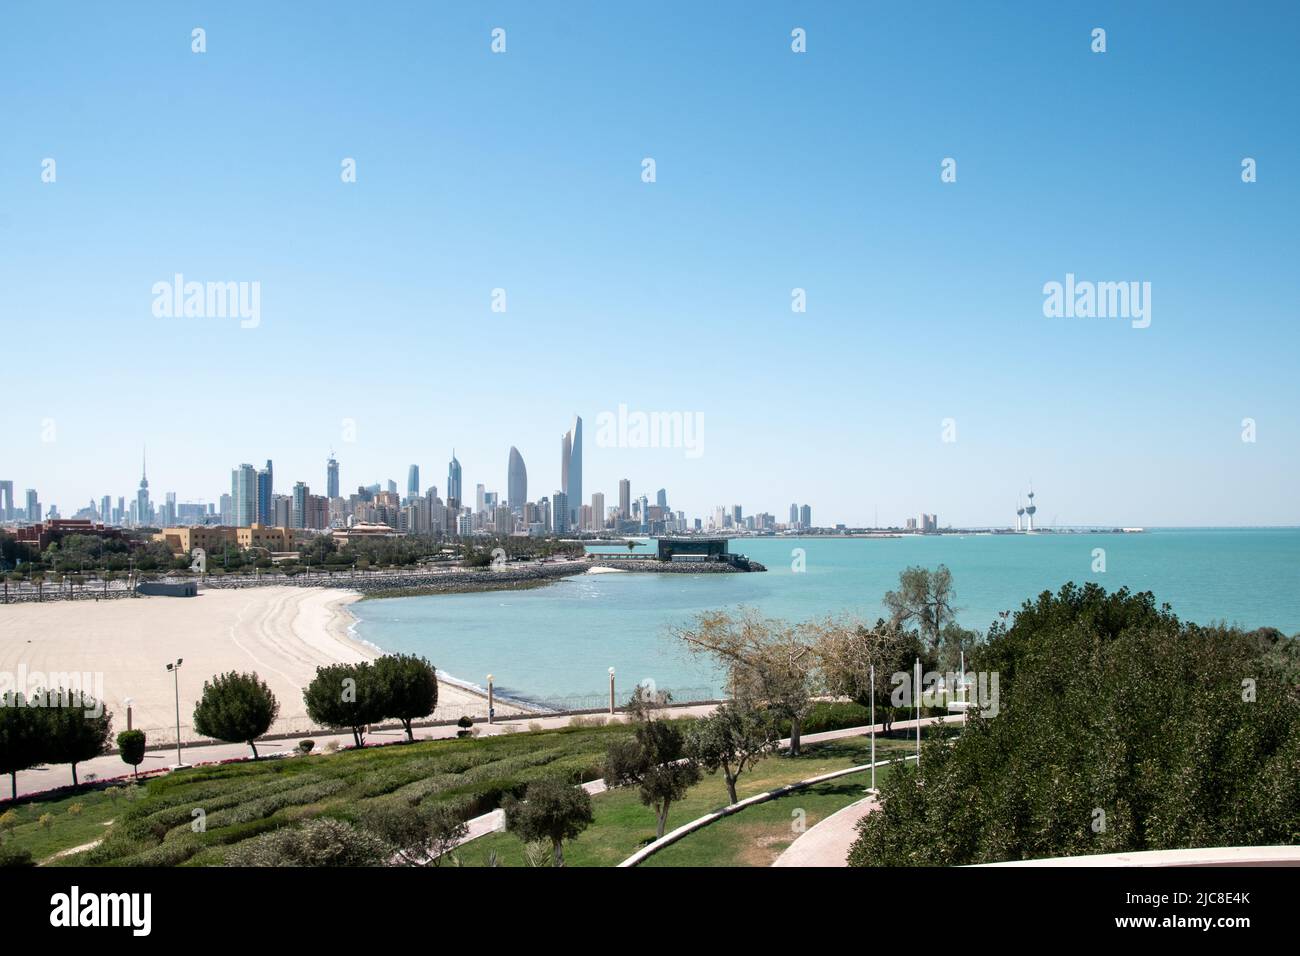 A panoramic view of the Kuwait City Skyline Stock Photo